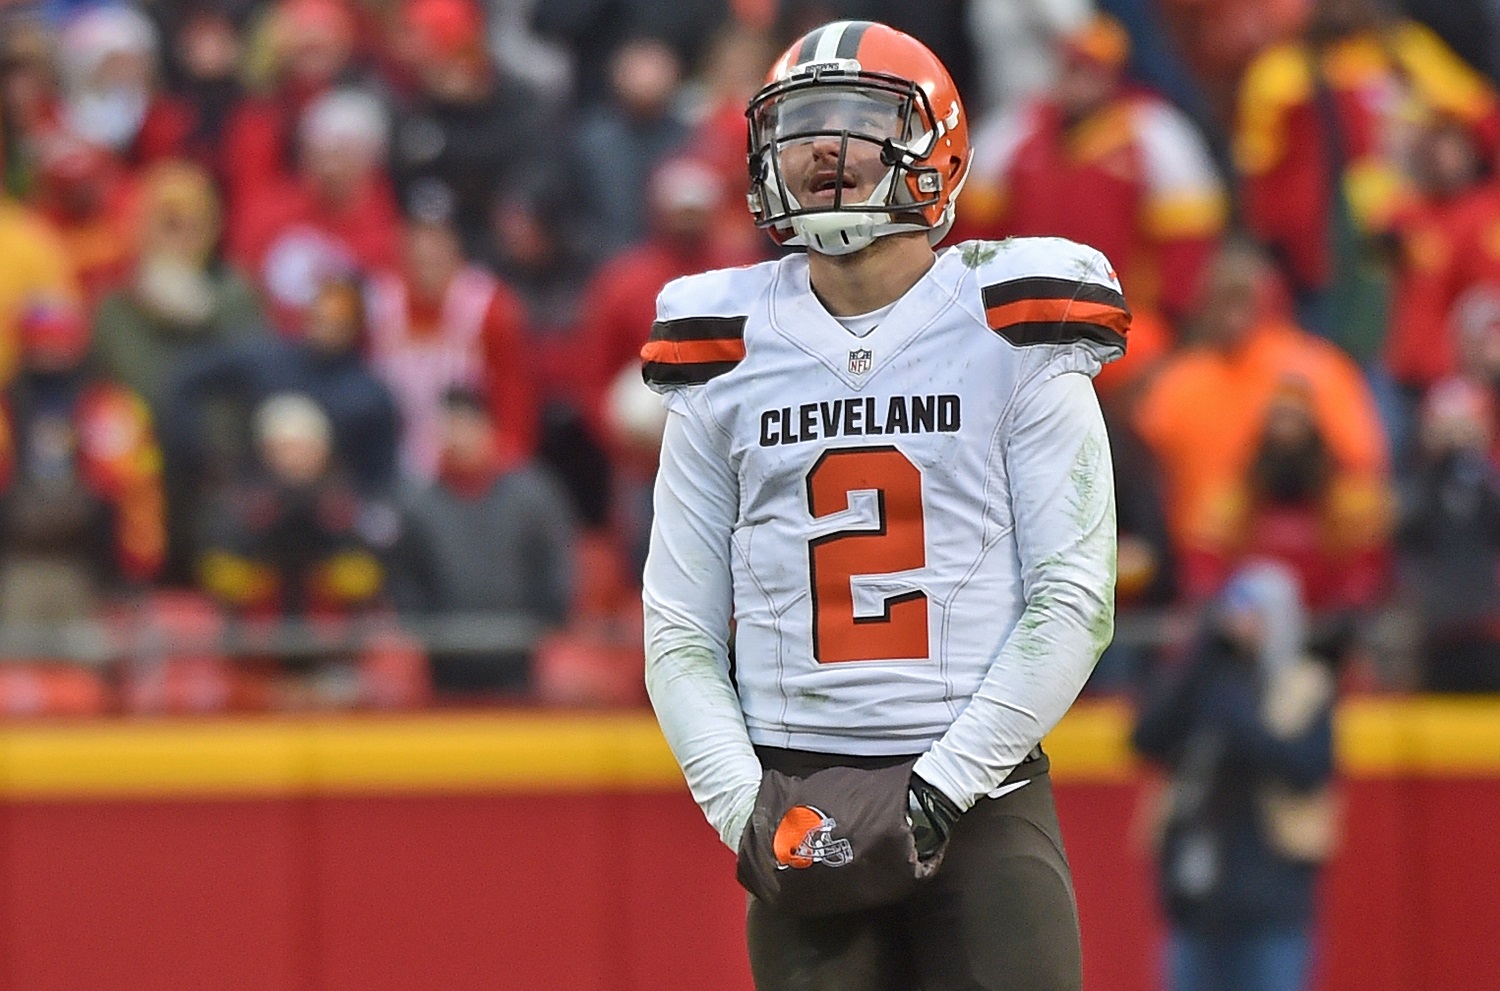 Johnny Manziel epitomizes the failures of the Cleveland Browns when it comes to picking quarterbacks in the first round of the NFL draft.